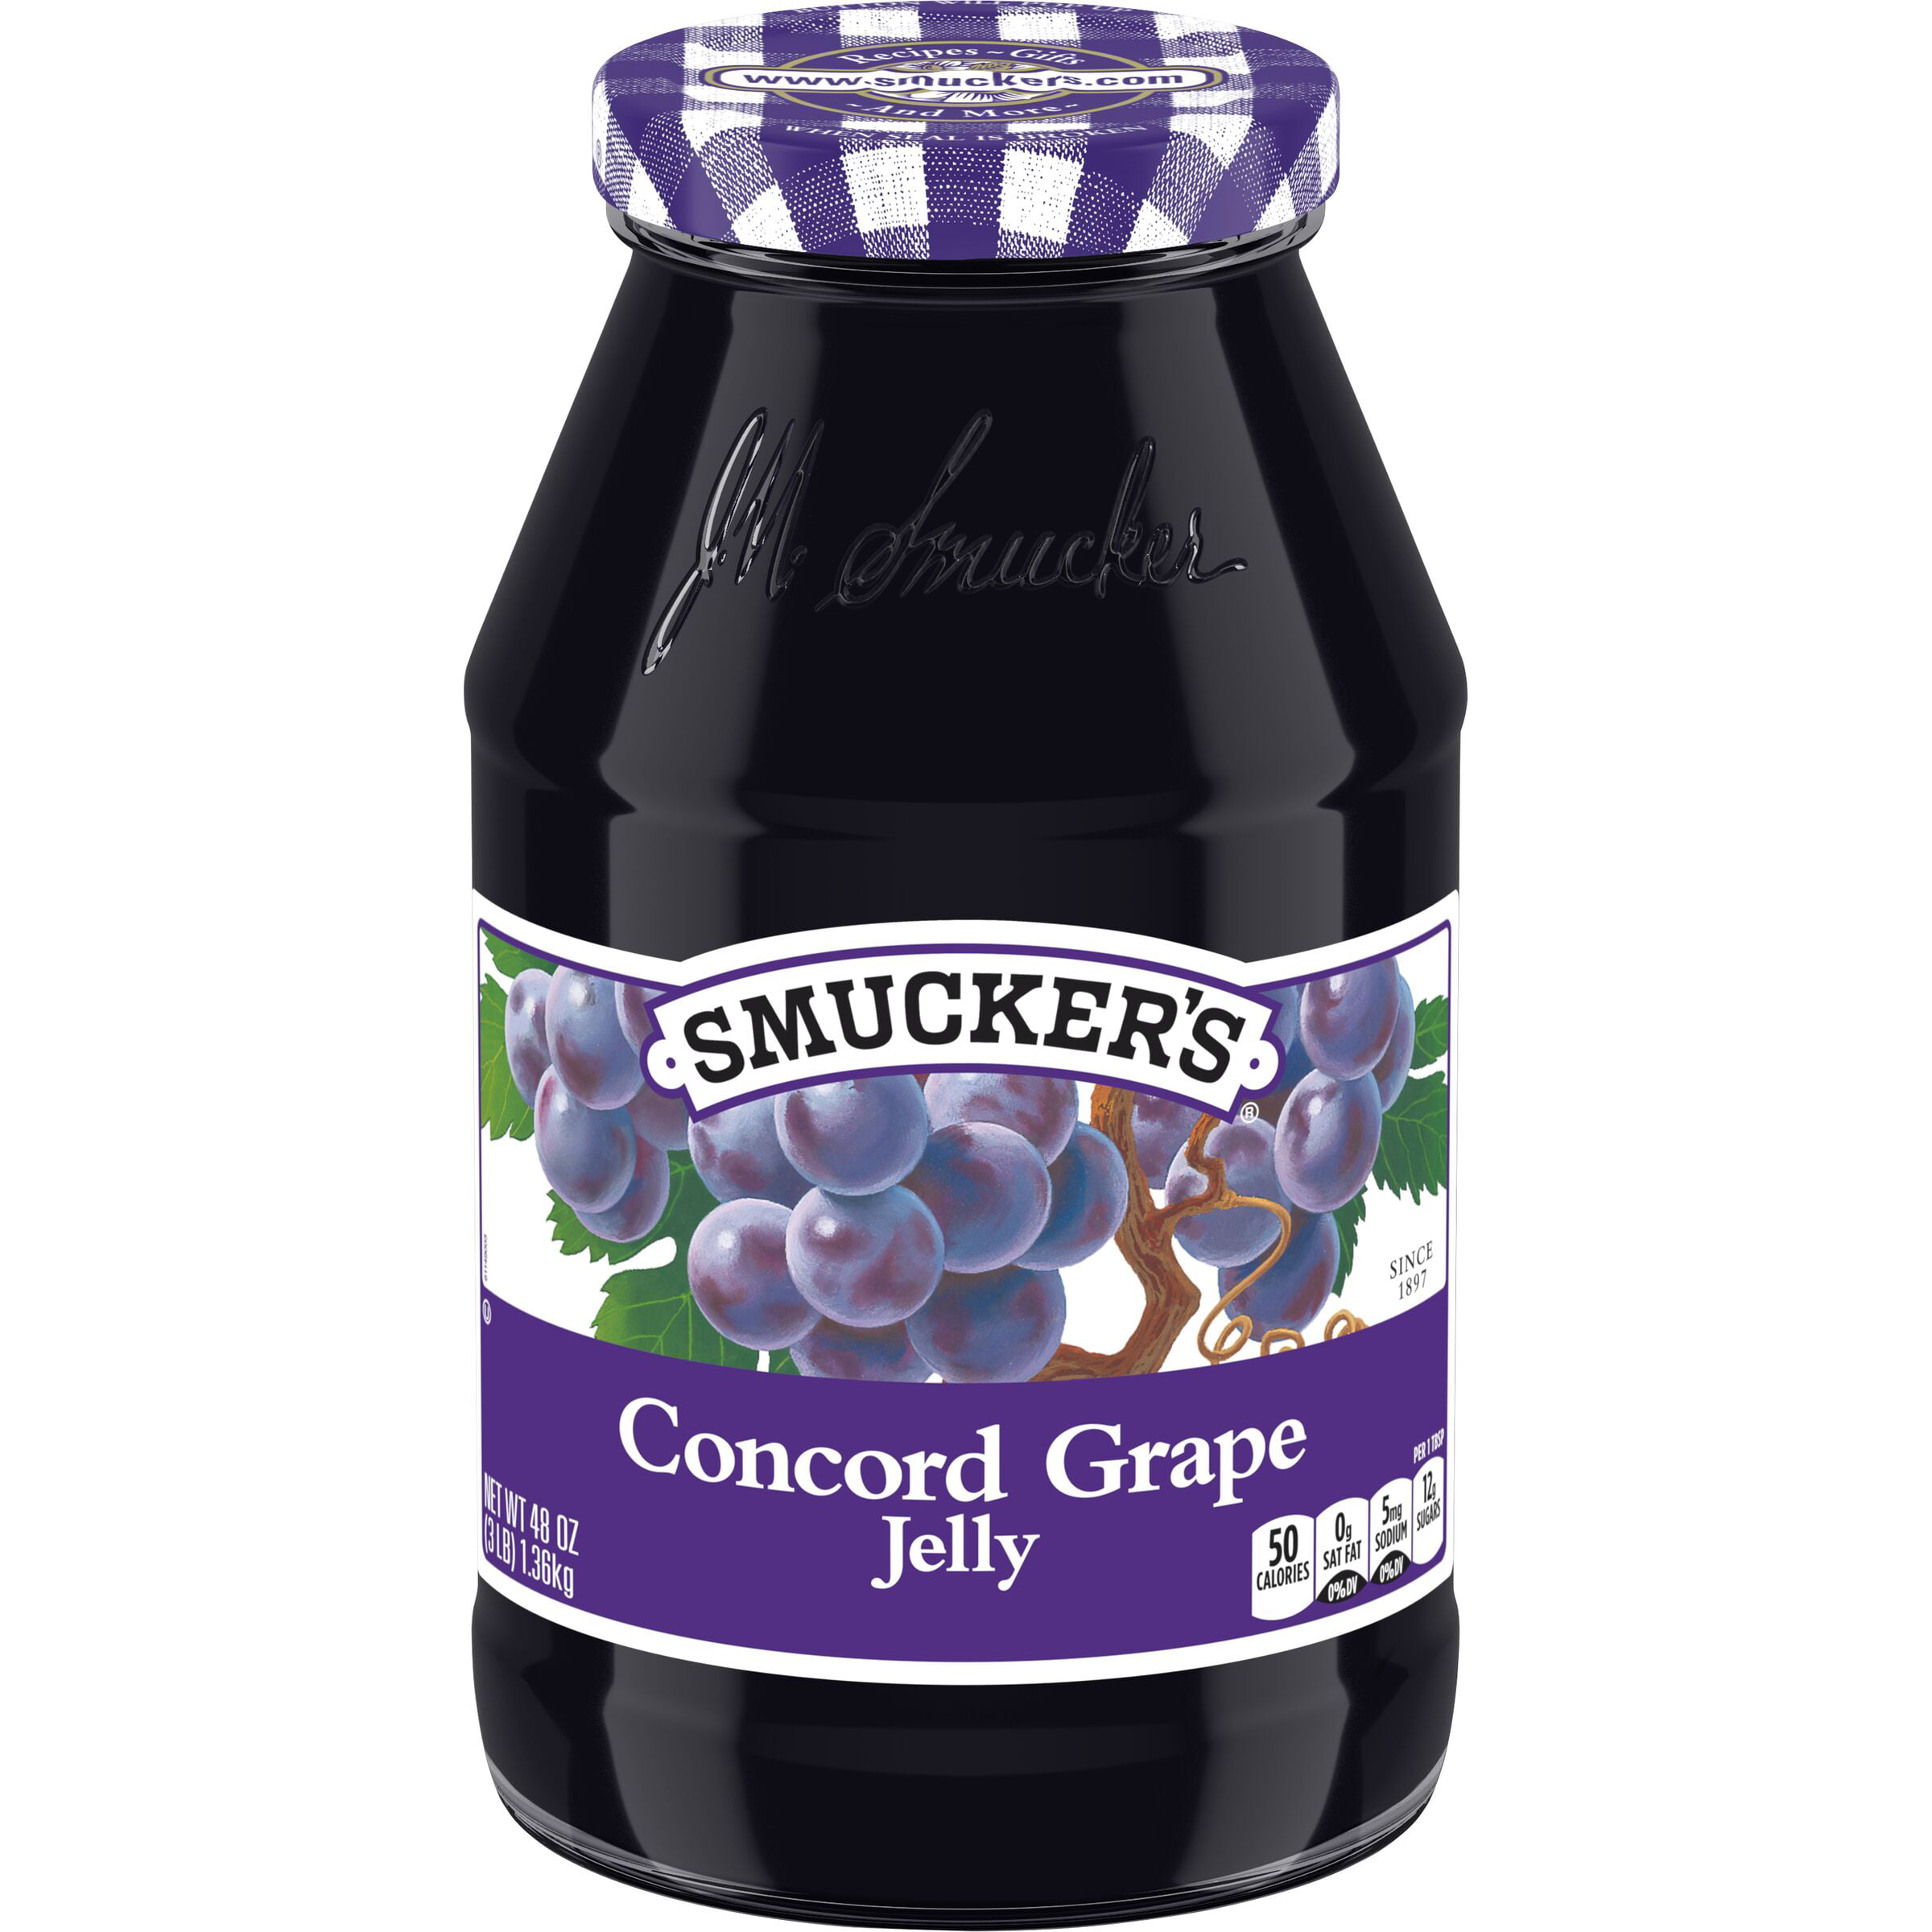 Buy Smucker's Concord Grape Jelly, 48-Ounce at Walmart.com.